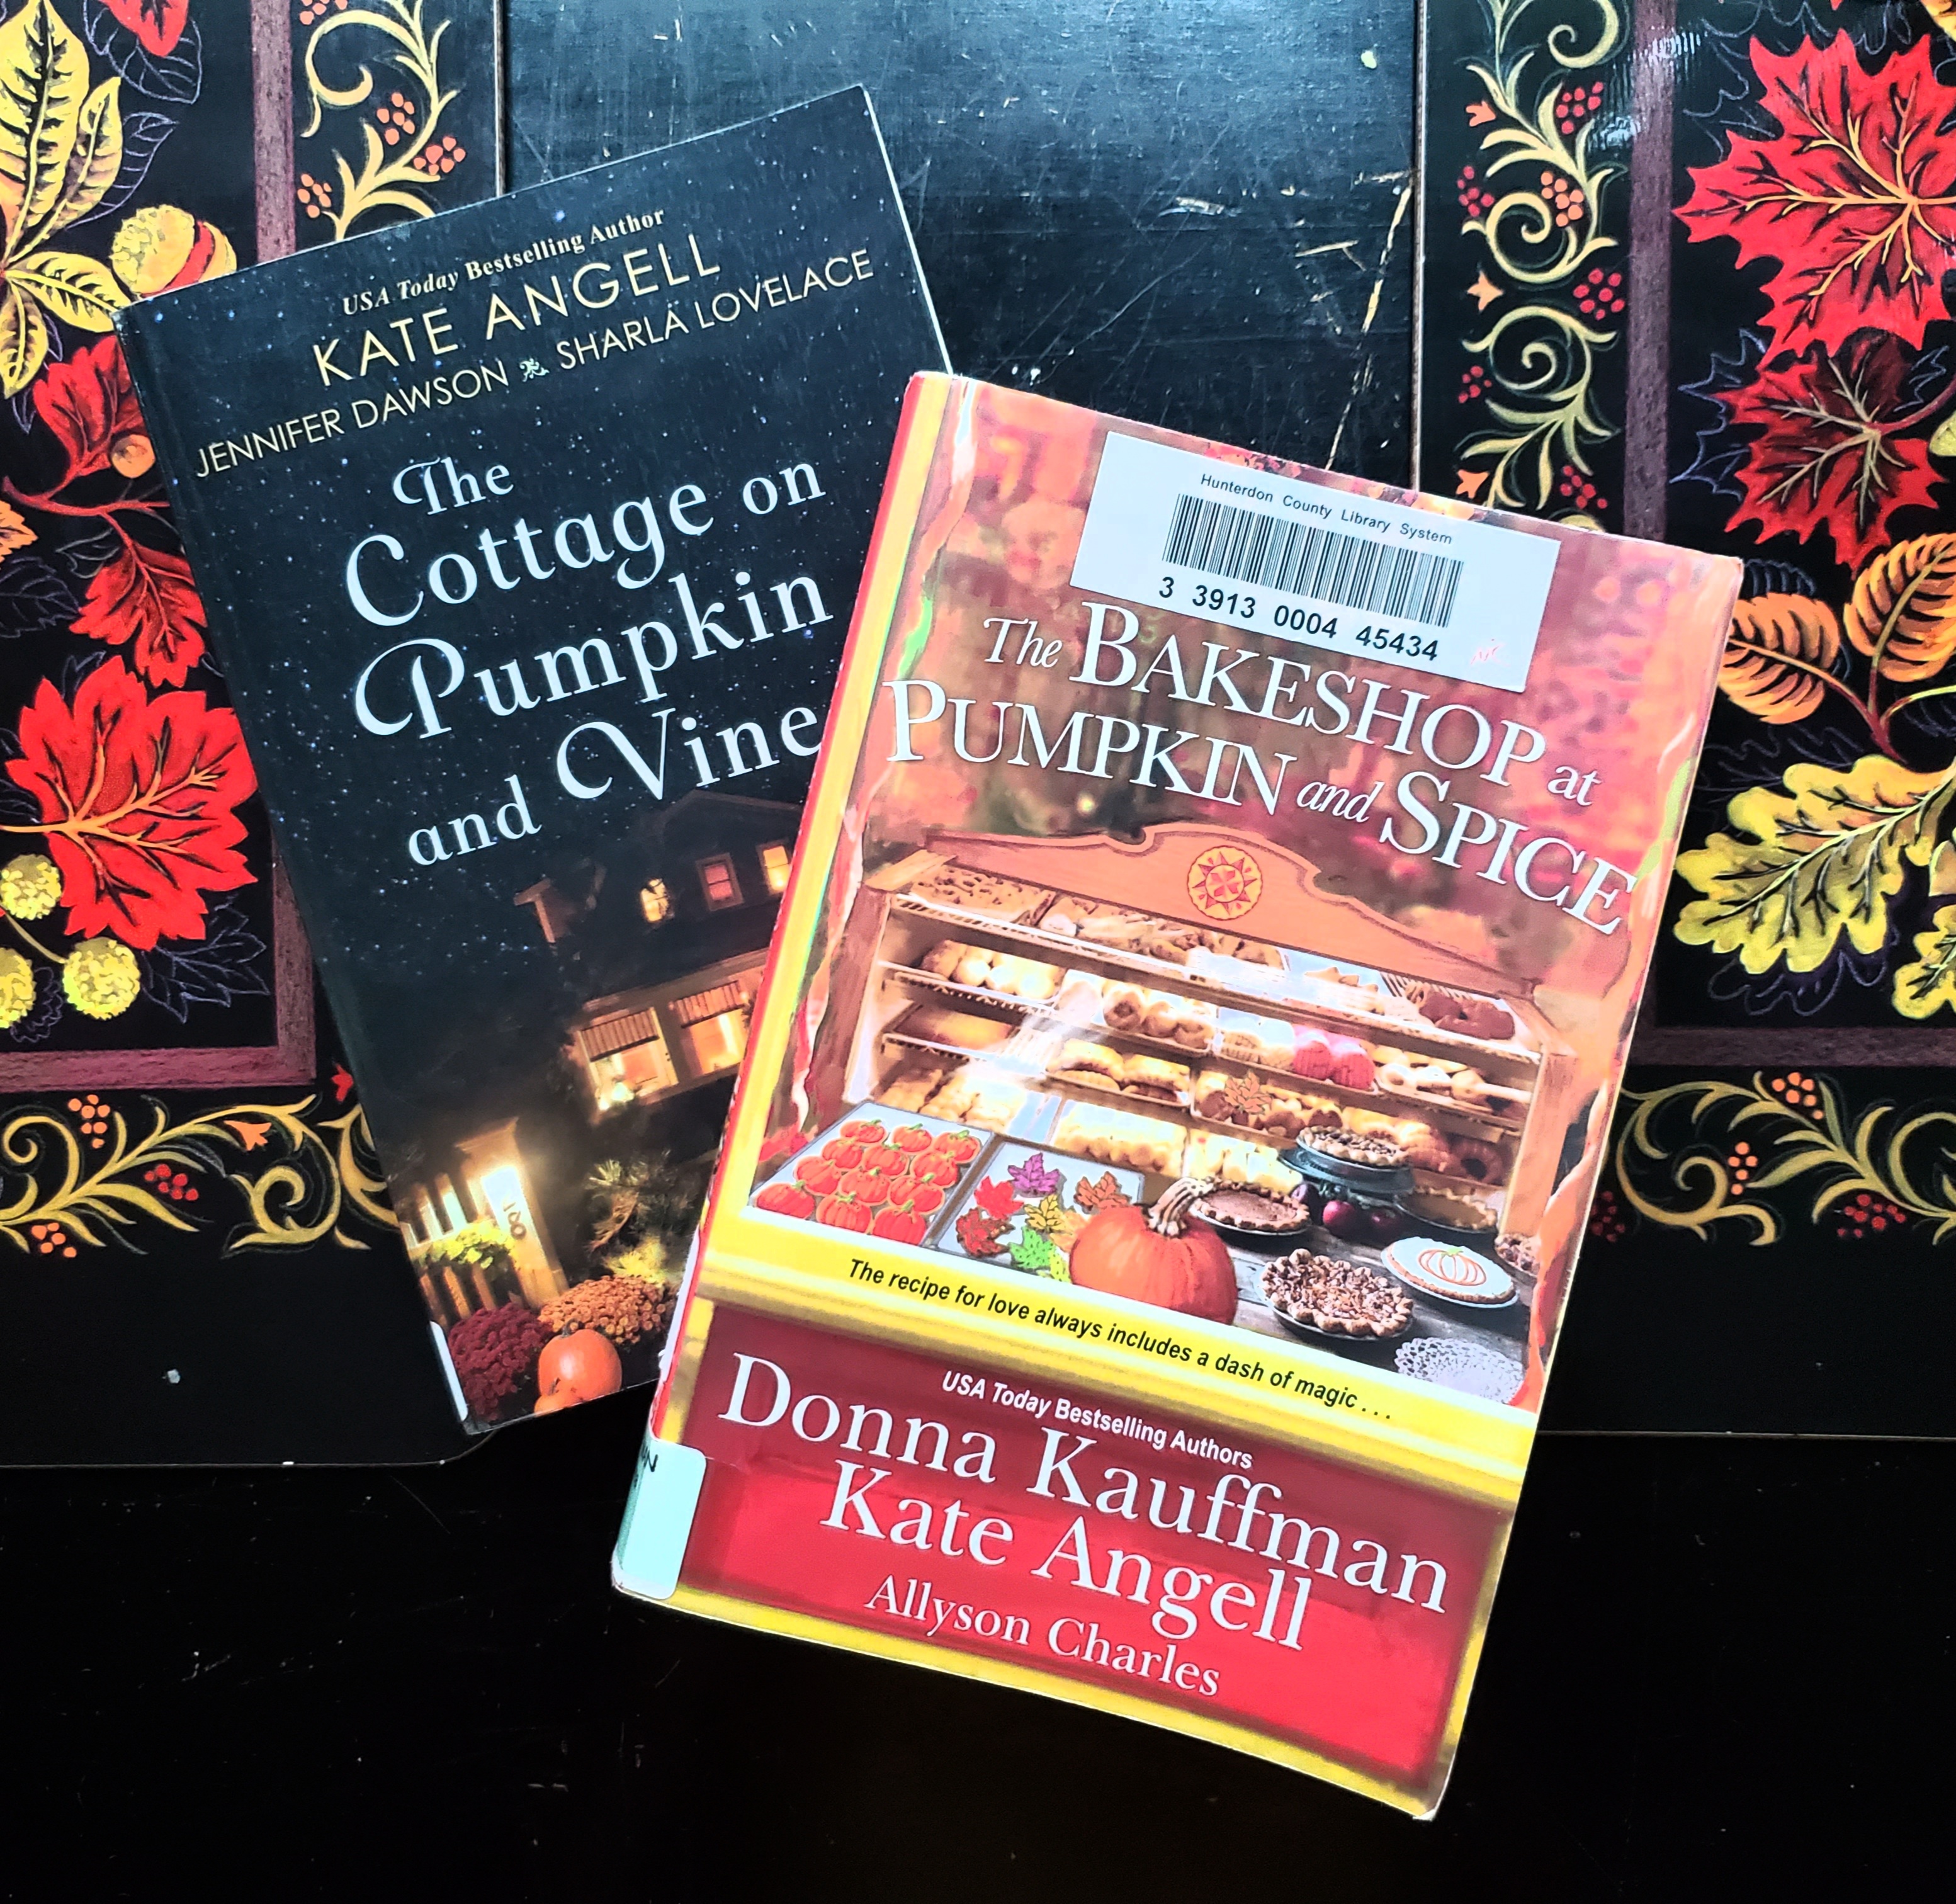 Dual Book Review: THE COTTAGE ON PUMPKIN AND VINE and THE BAKESHOP AT PUMPKIN AND SPICE